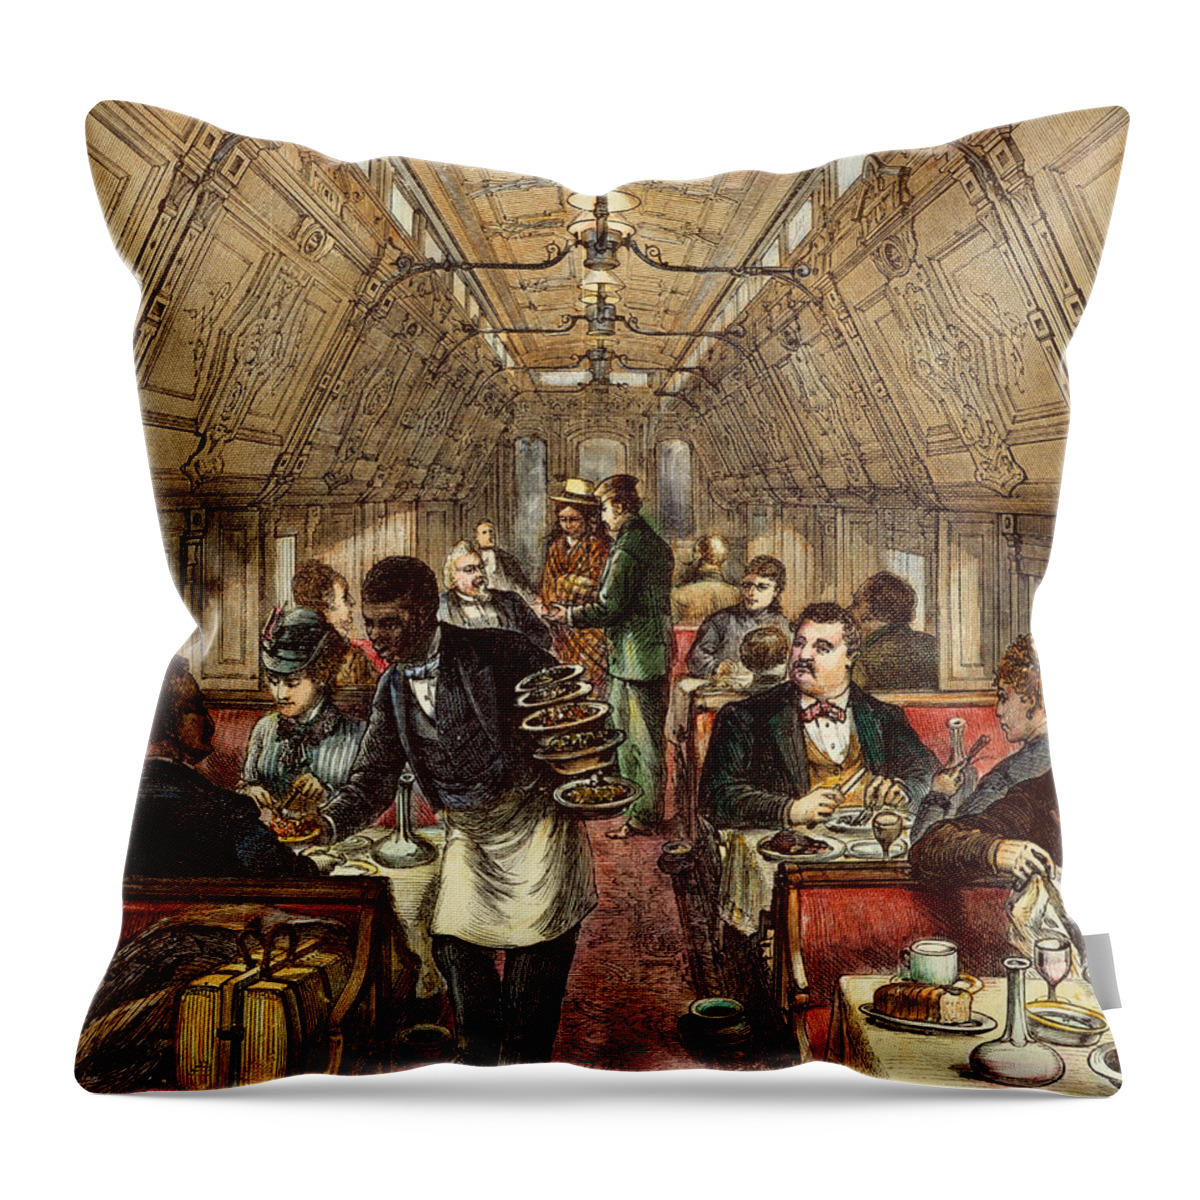 1877 Throw Pillow featuring the photograph Pullman: Dining Car, 1877 by Granger